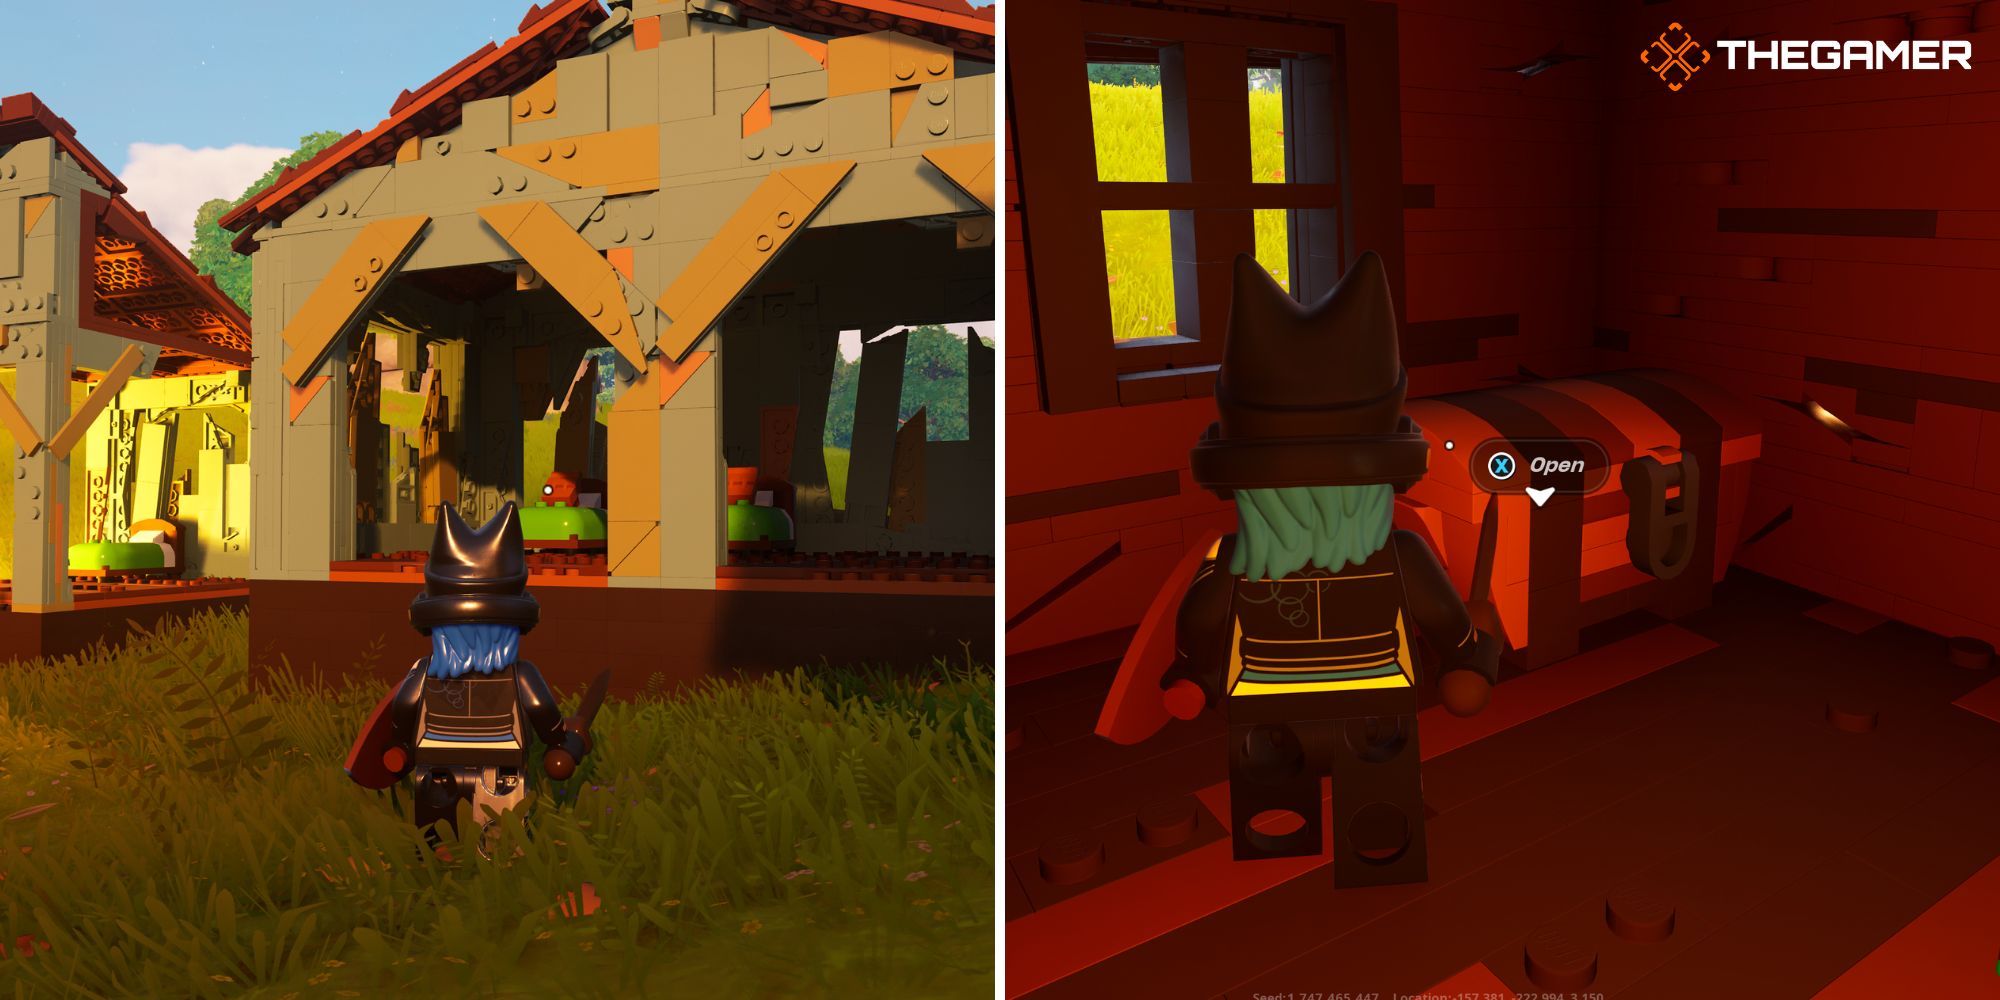 Lego Fortnite: Left: Standing in front of house build with planks, right: standing in front of chest built with planks